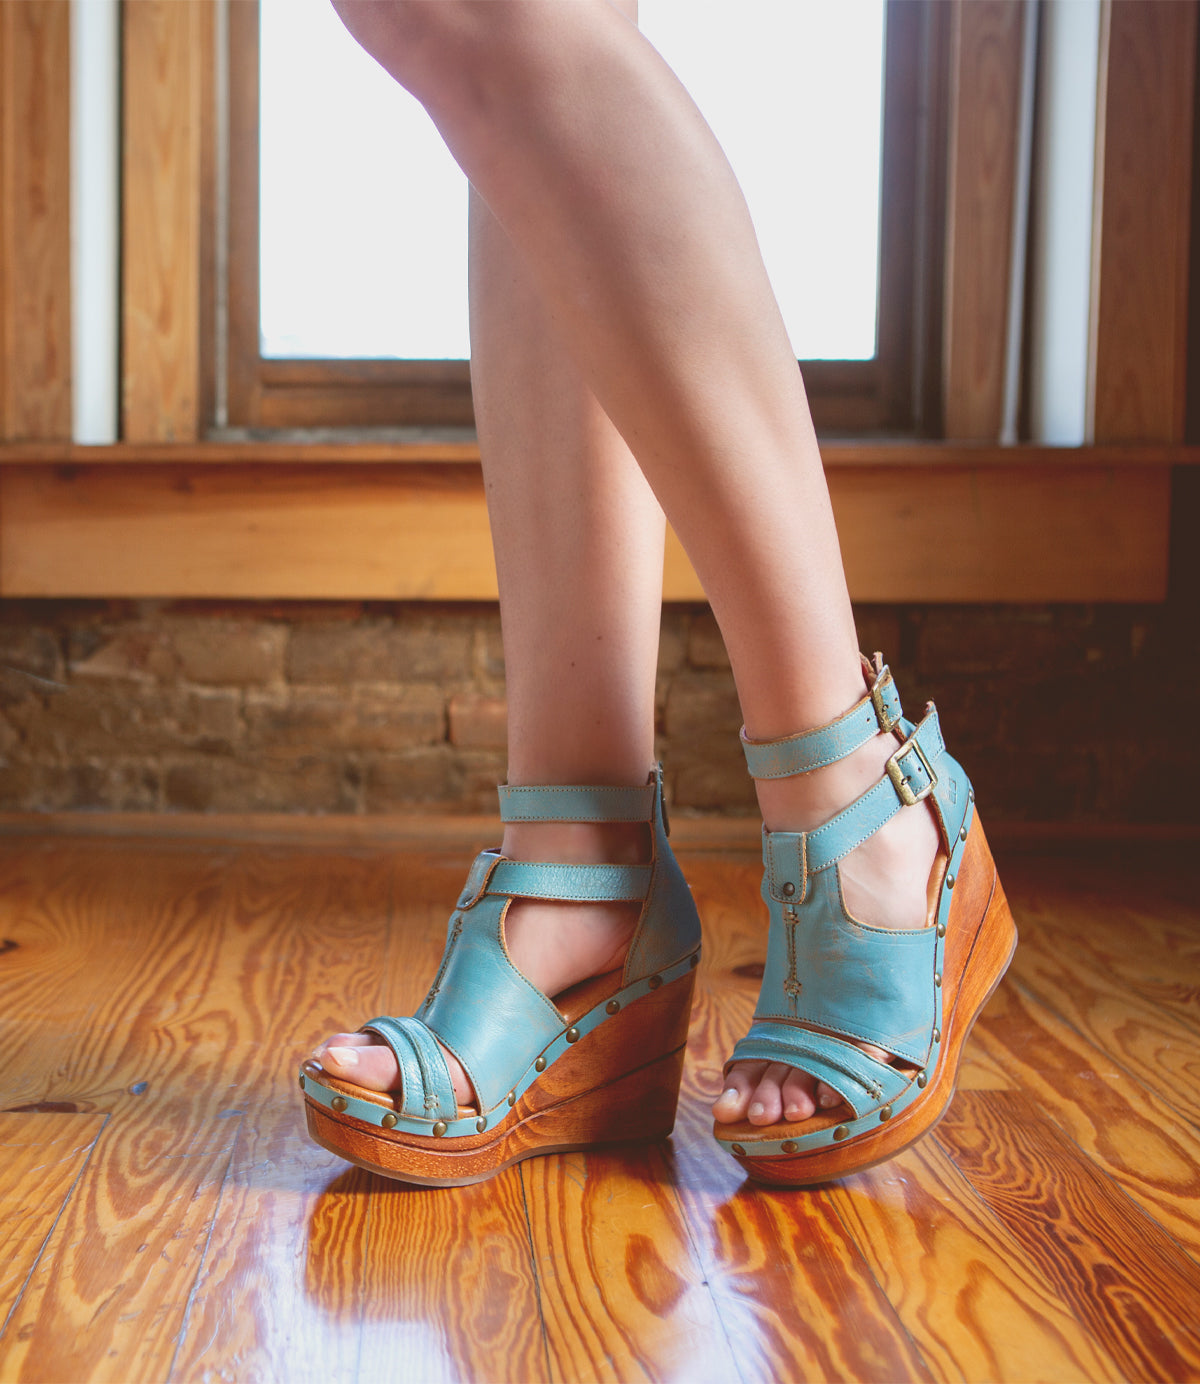 A woman wearing blue Princess wedge sandals with woven strappy uppers standing on a sustainable wooden floor.